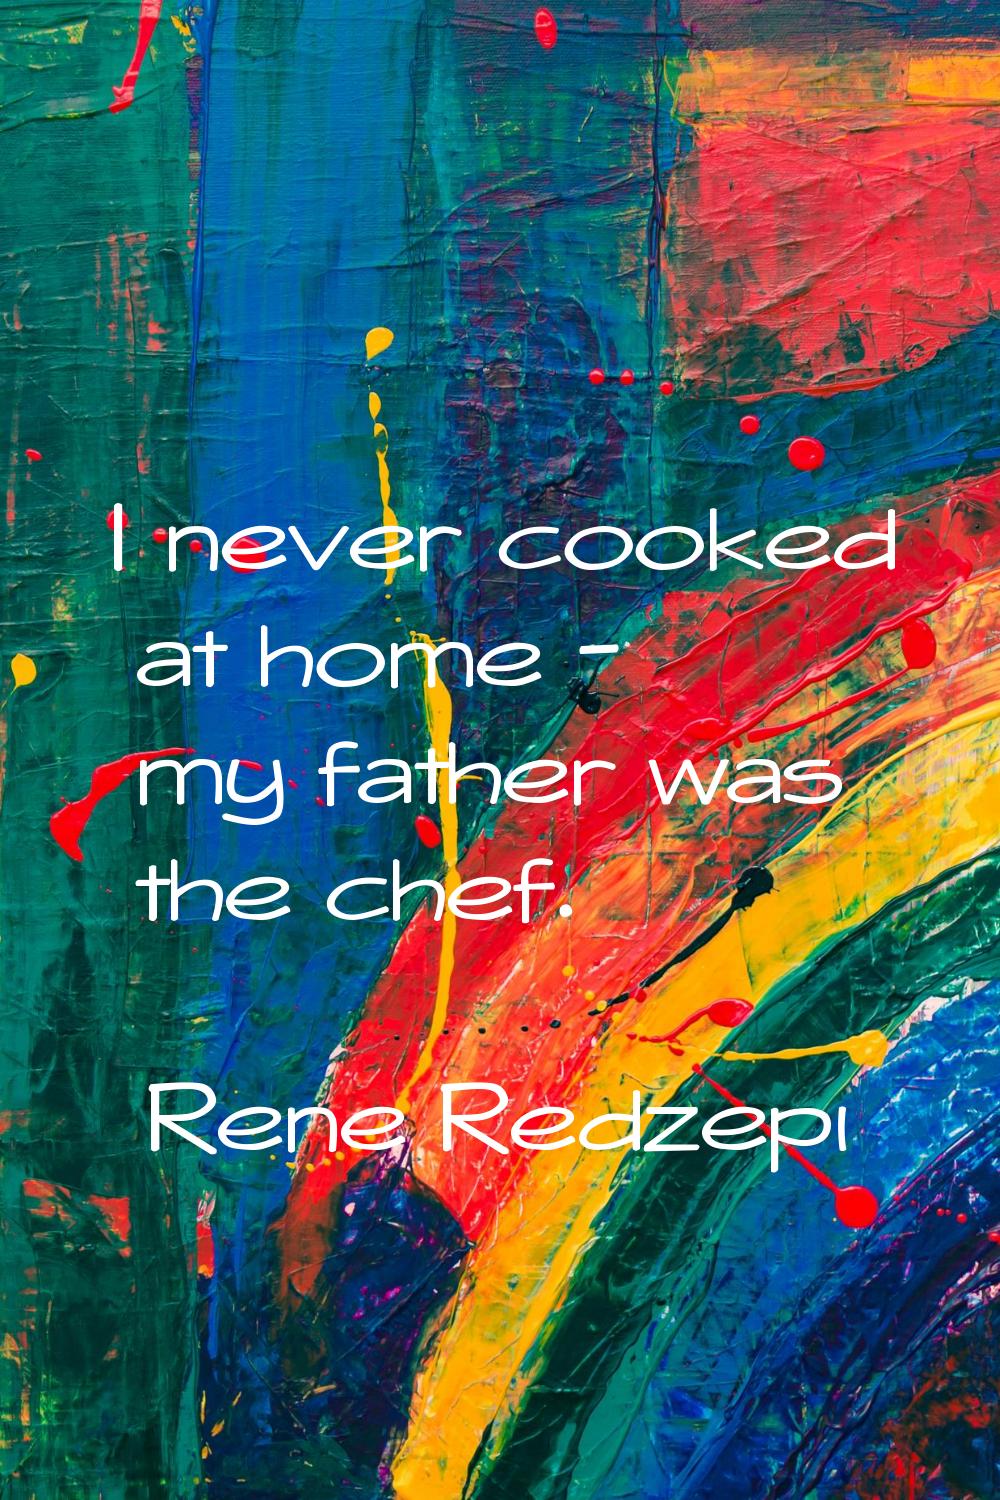 I never cooked at home - my father was the chef.